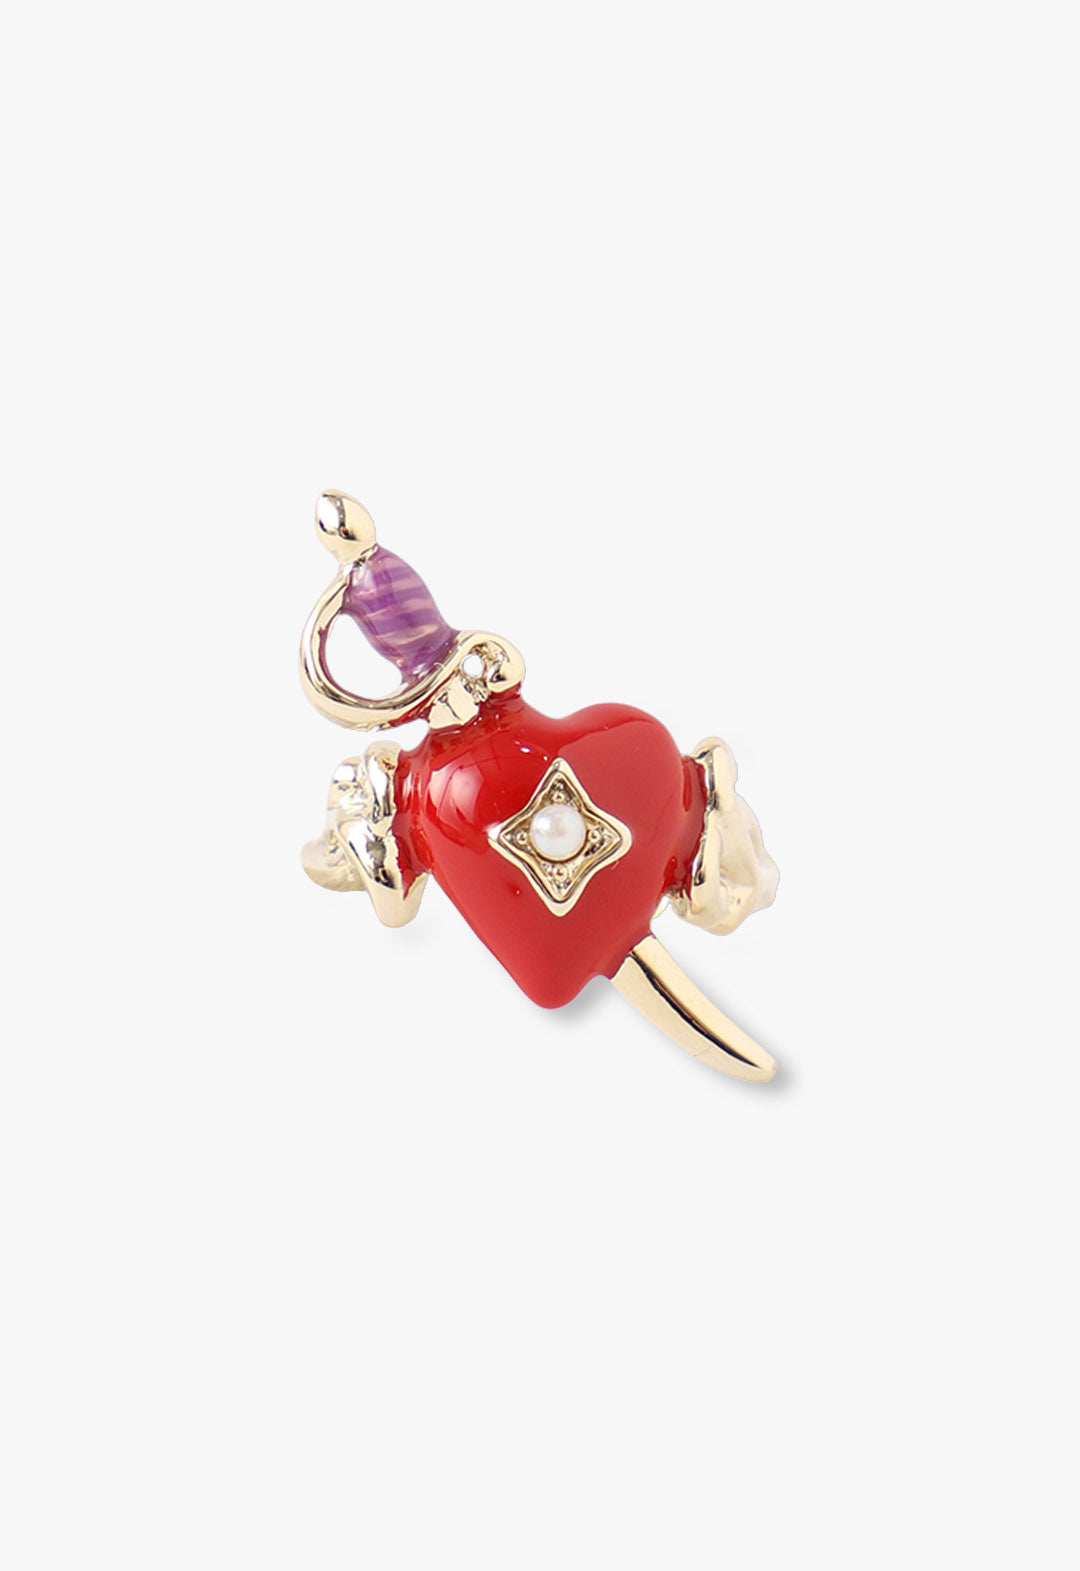 Pirate Heart Ring, golden saber with purple grip, red heart with a pearl in a star golden shape